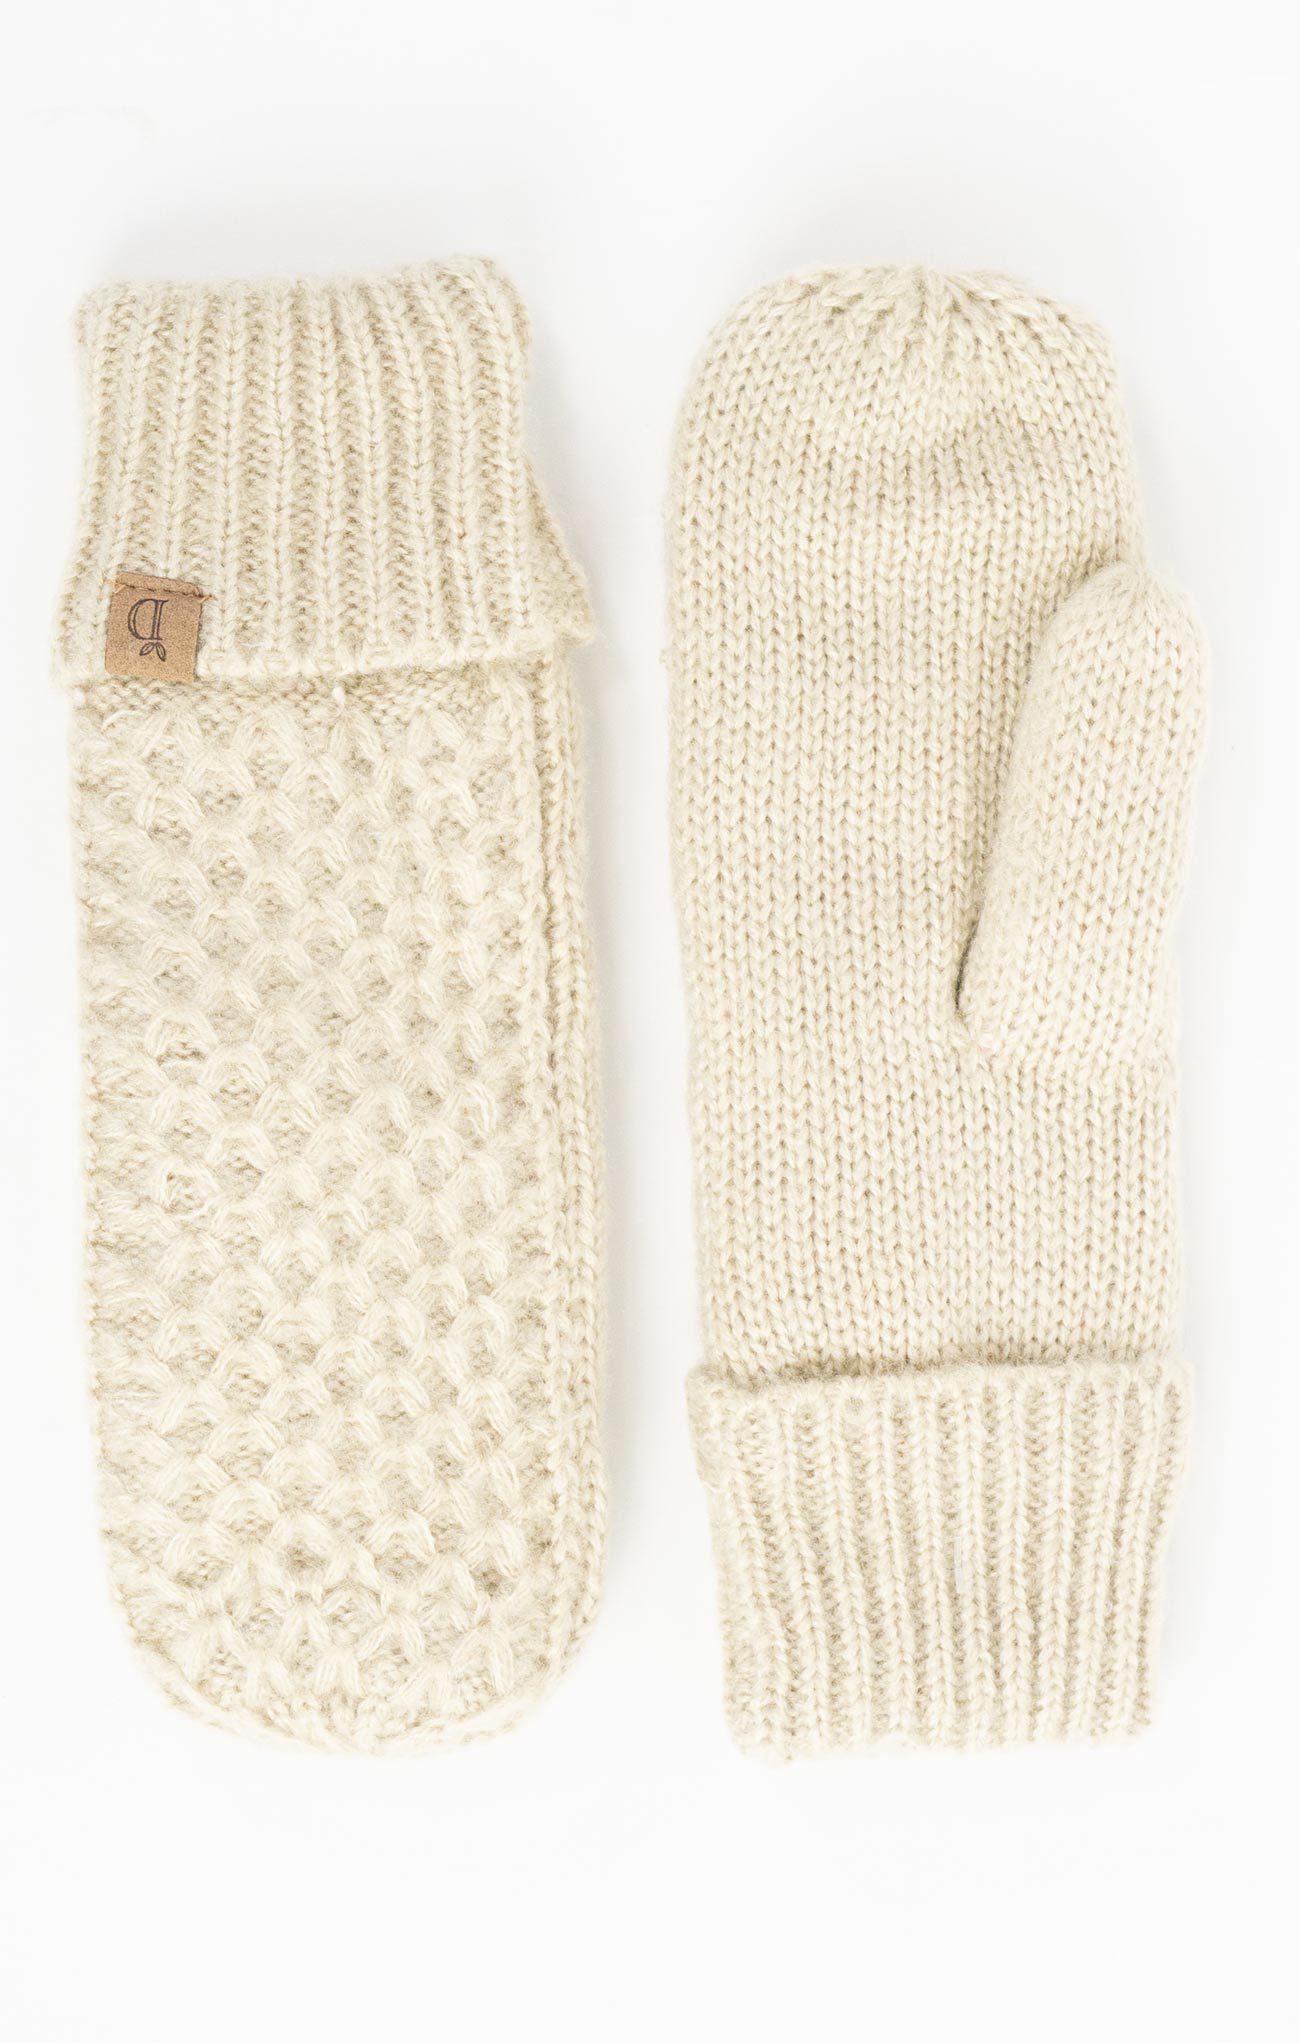 CABLE KNIT MITTENS W/ SHERPA LINING-black,taupe,beige,grey,mittens,knitted